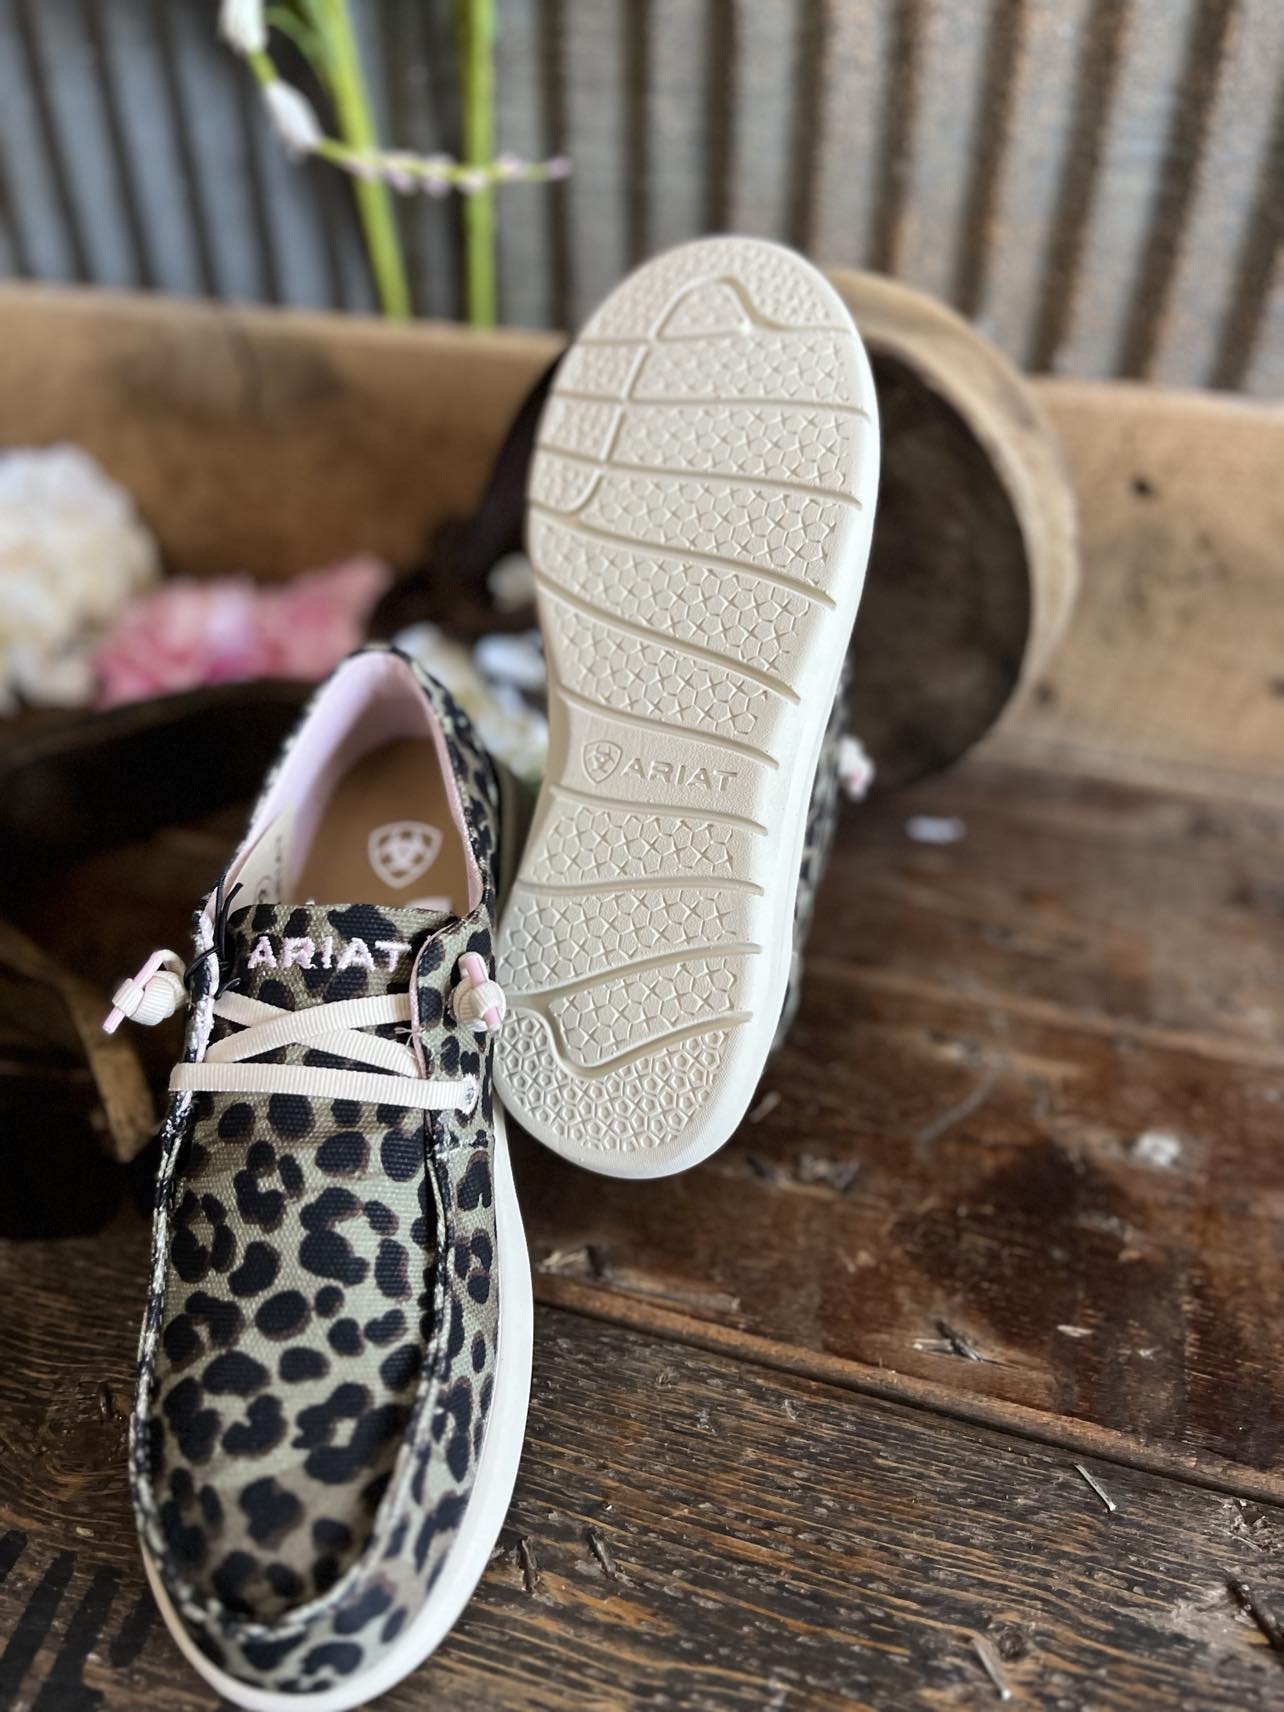 Women's Ariat Hilo Sneakers in Olive Leopard-Women's Casual Shoes-Ariat-Lucky J Boots & More, Women's, Men's, & Kids Western Store Located in Carthage, MO